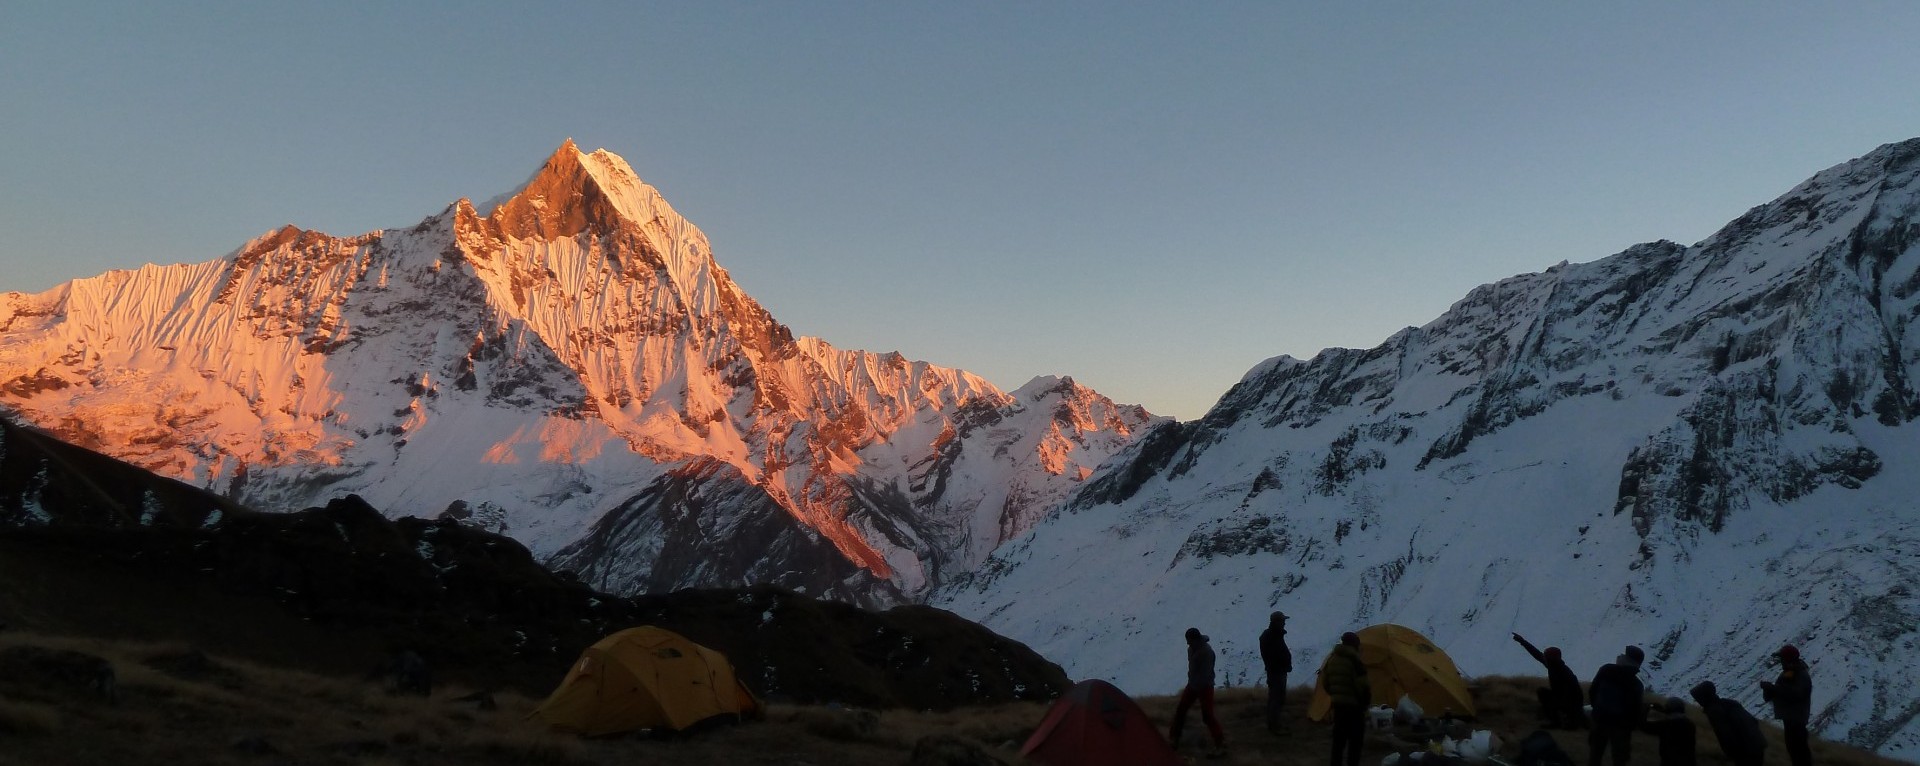 The Sunset view over Mt. Machhapuchhre seen from Tent Peak high camp